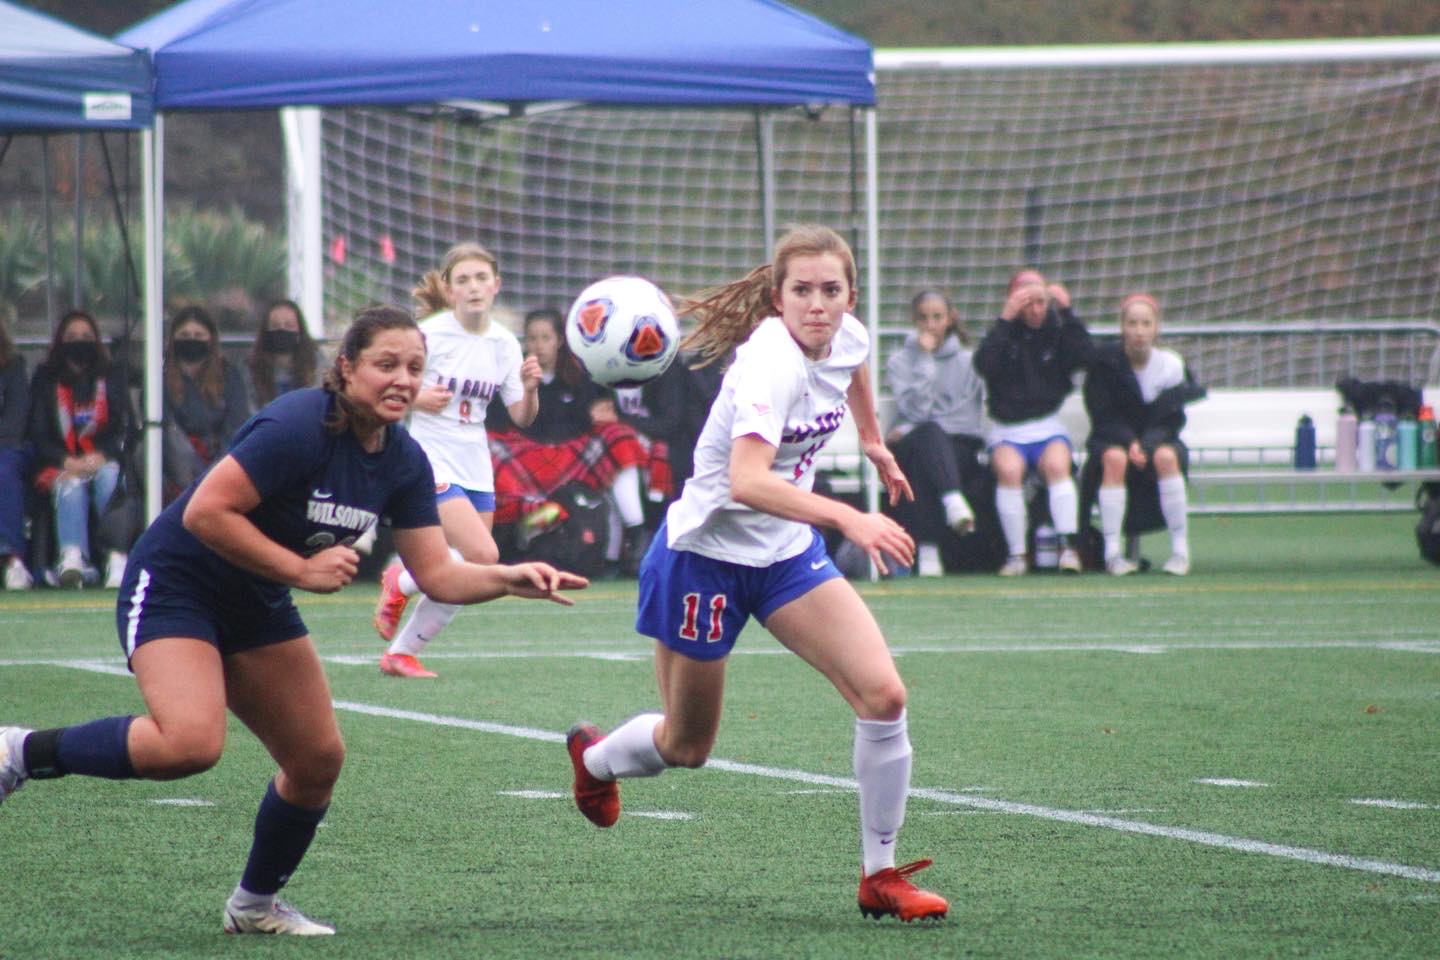 Photos+From+The+State+Championship%3A+La+Salle%E2%80%99s+Girls+Soccer+Team+Competes+Against+Wilsonville